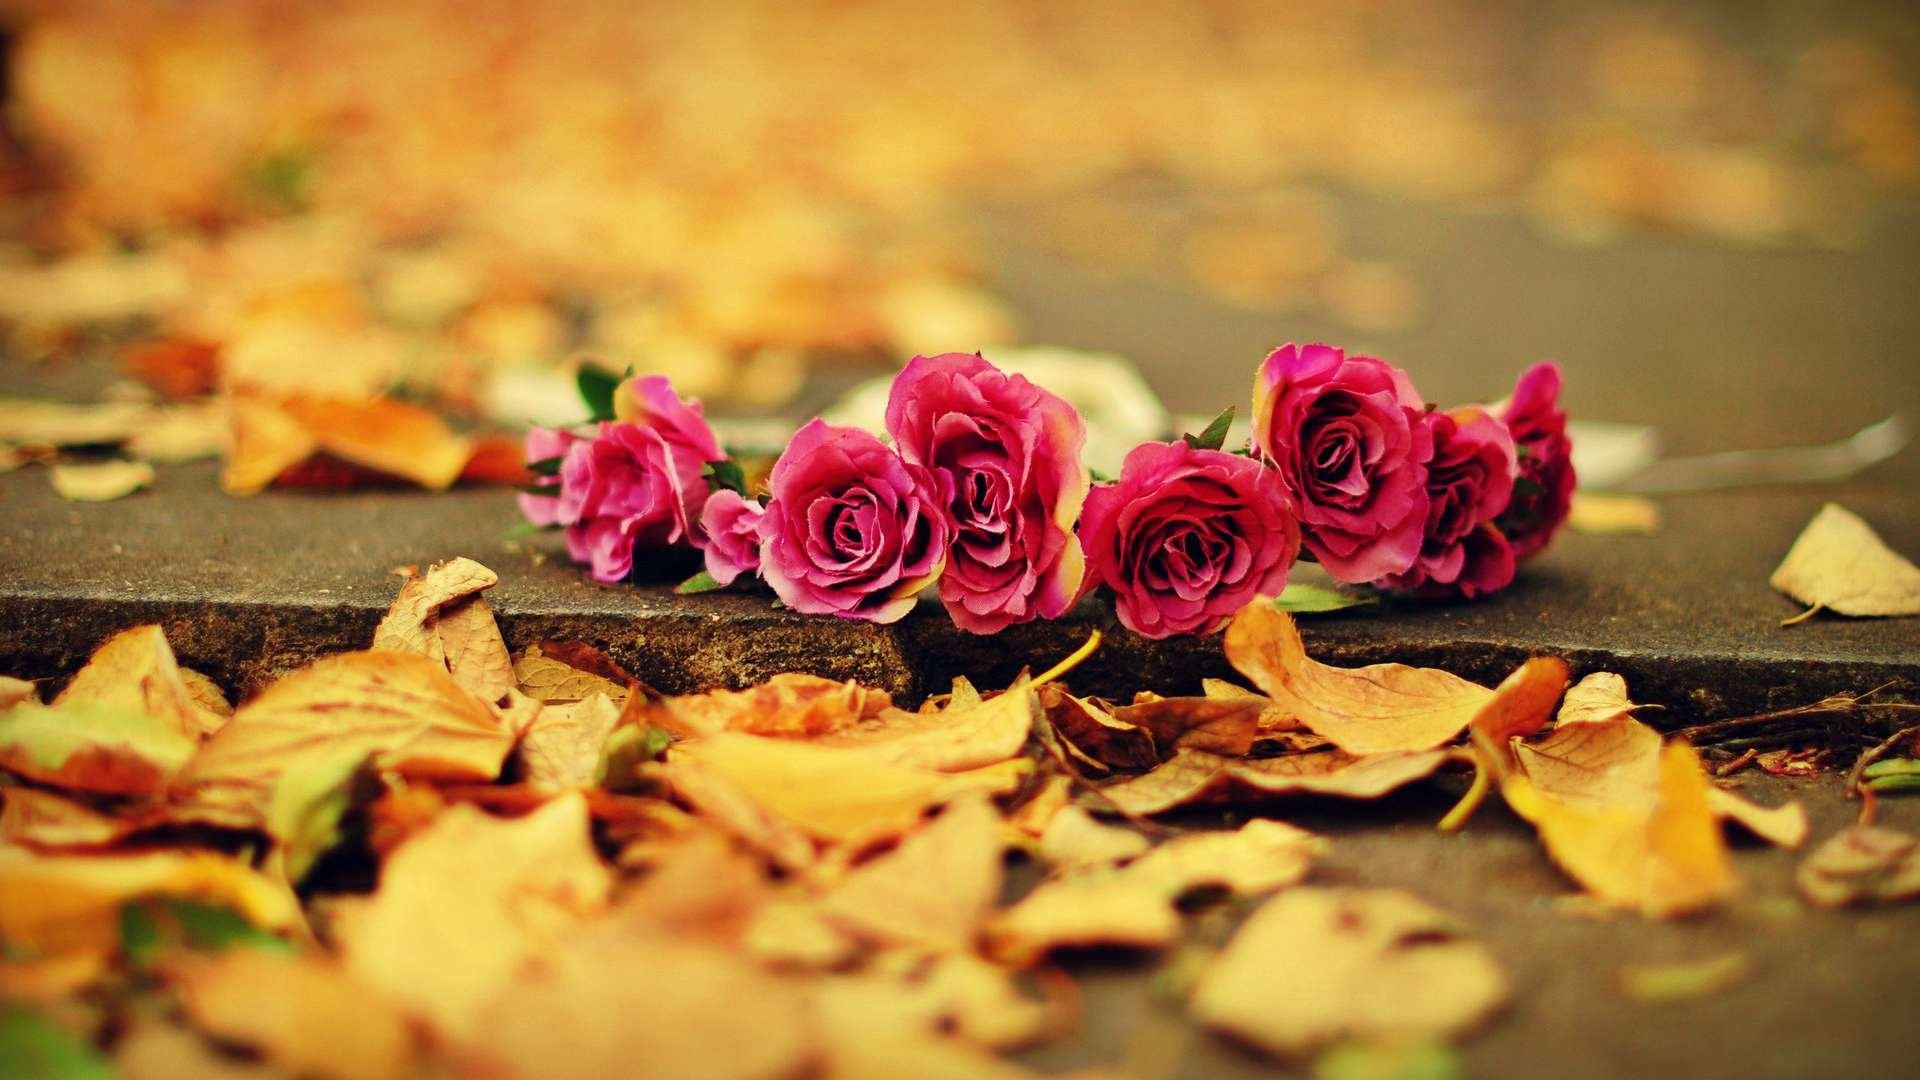 Fall Flowers Pictures  Download Free Images on Unsplash